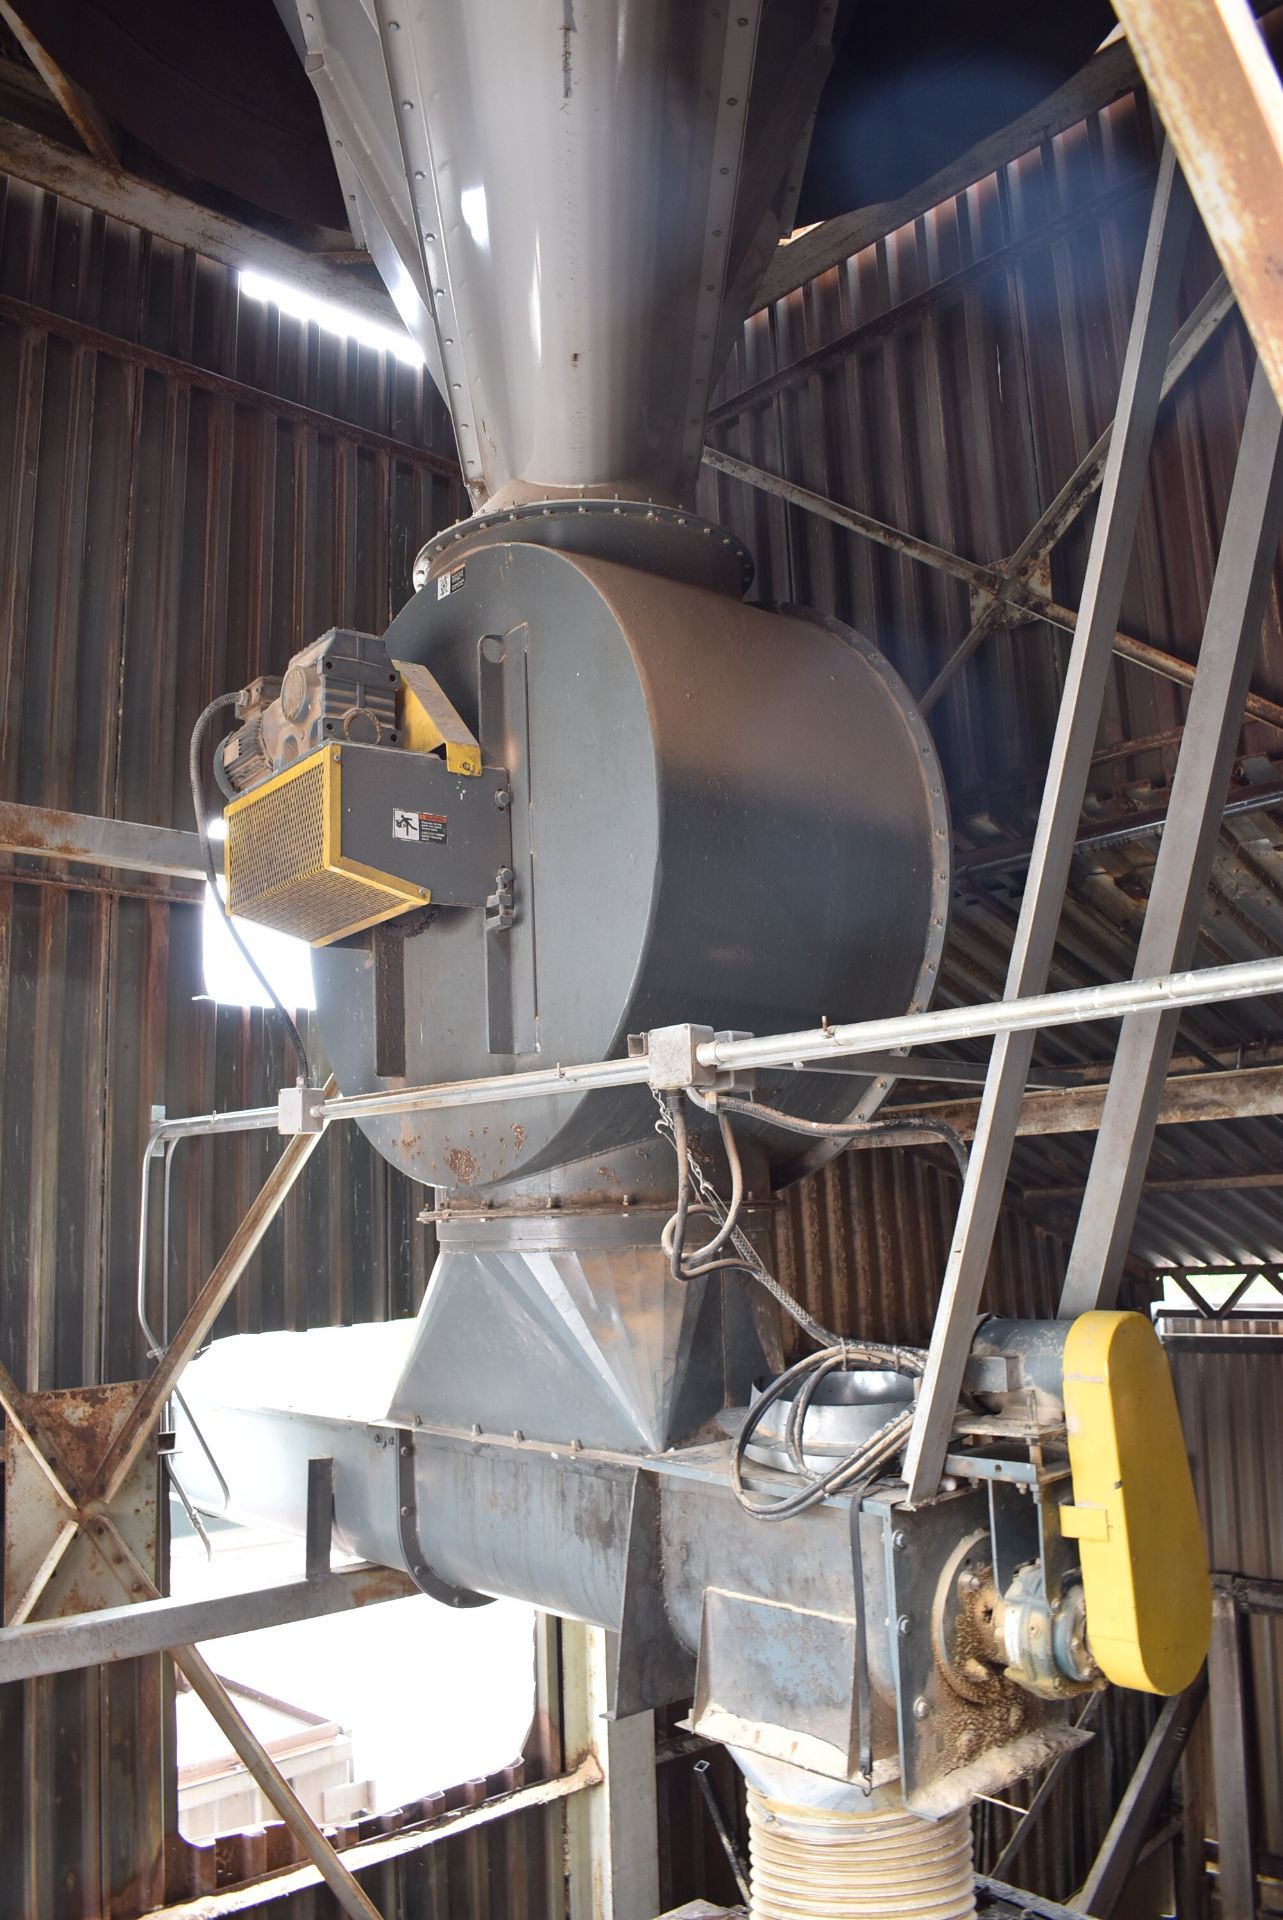 KRAEMER TOOL & MFG 60 HP DUST COLLECTION SYSTEM WITH 16,200 CFM CAPACITY, UPGRADED NORTHRIDGE - Image 6 of 17